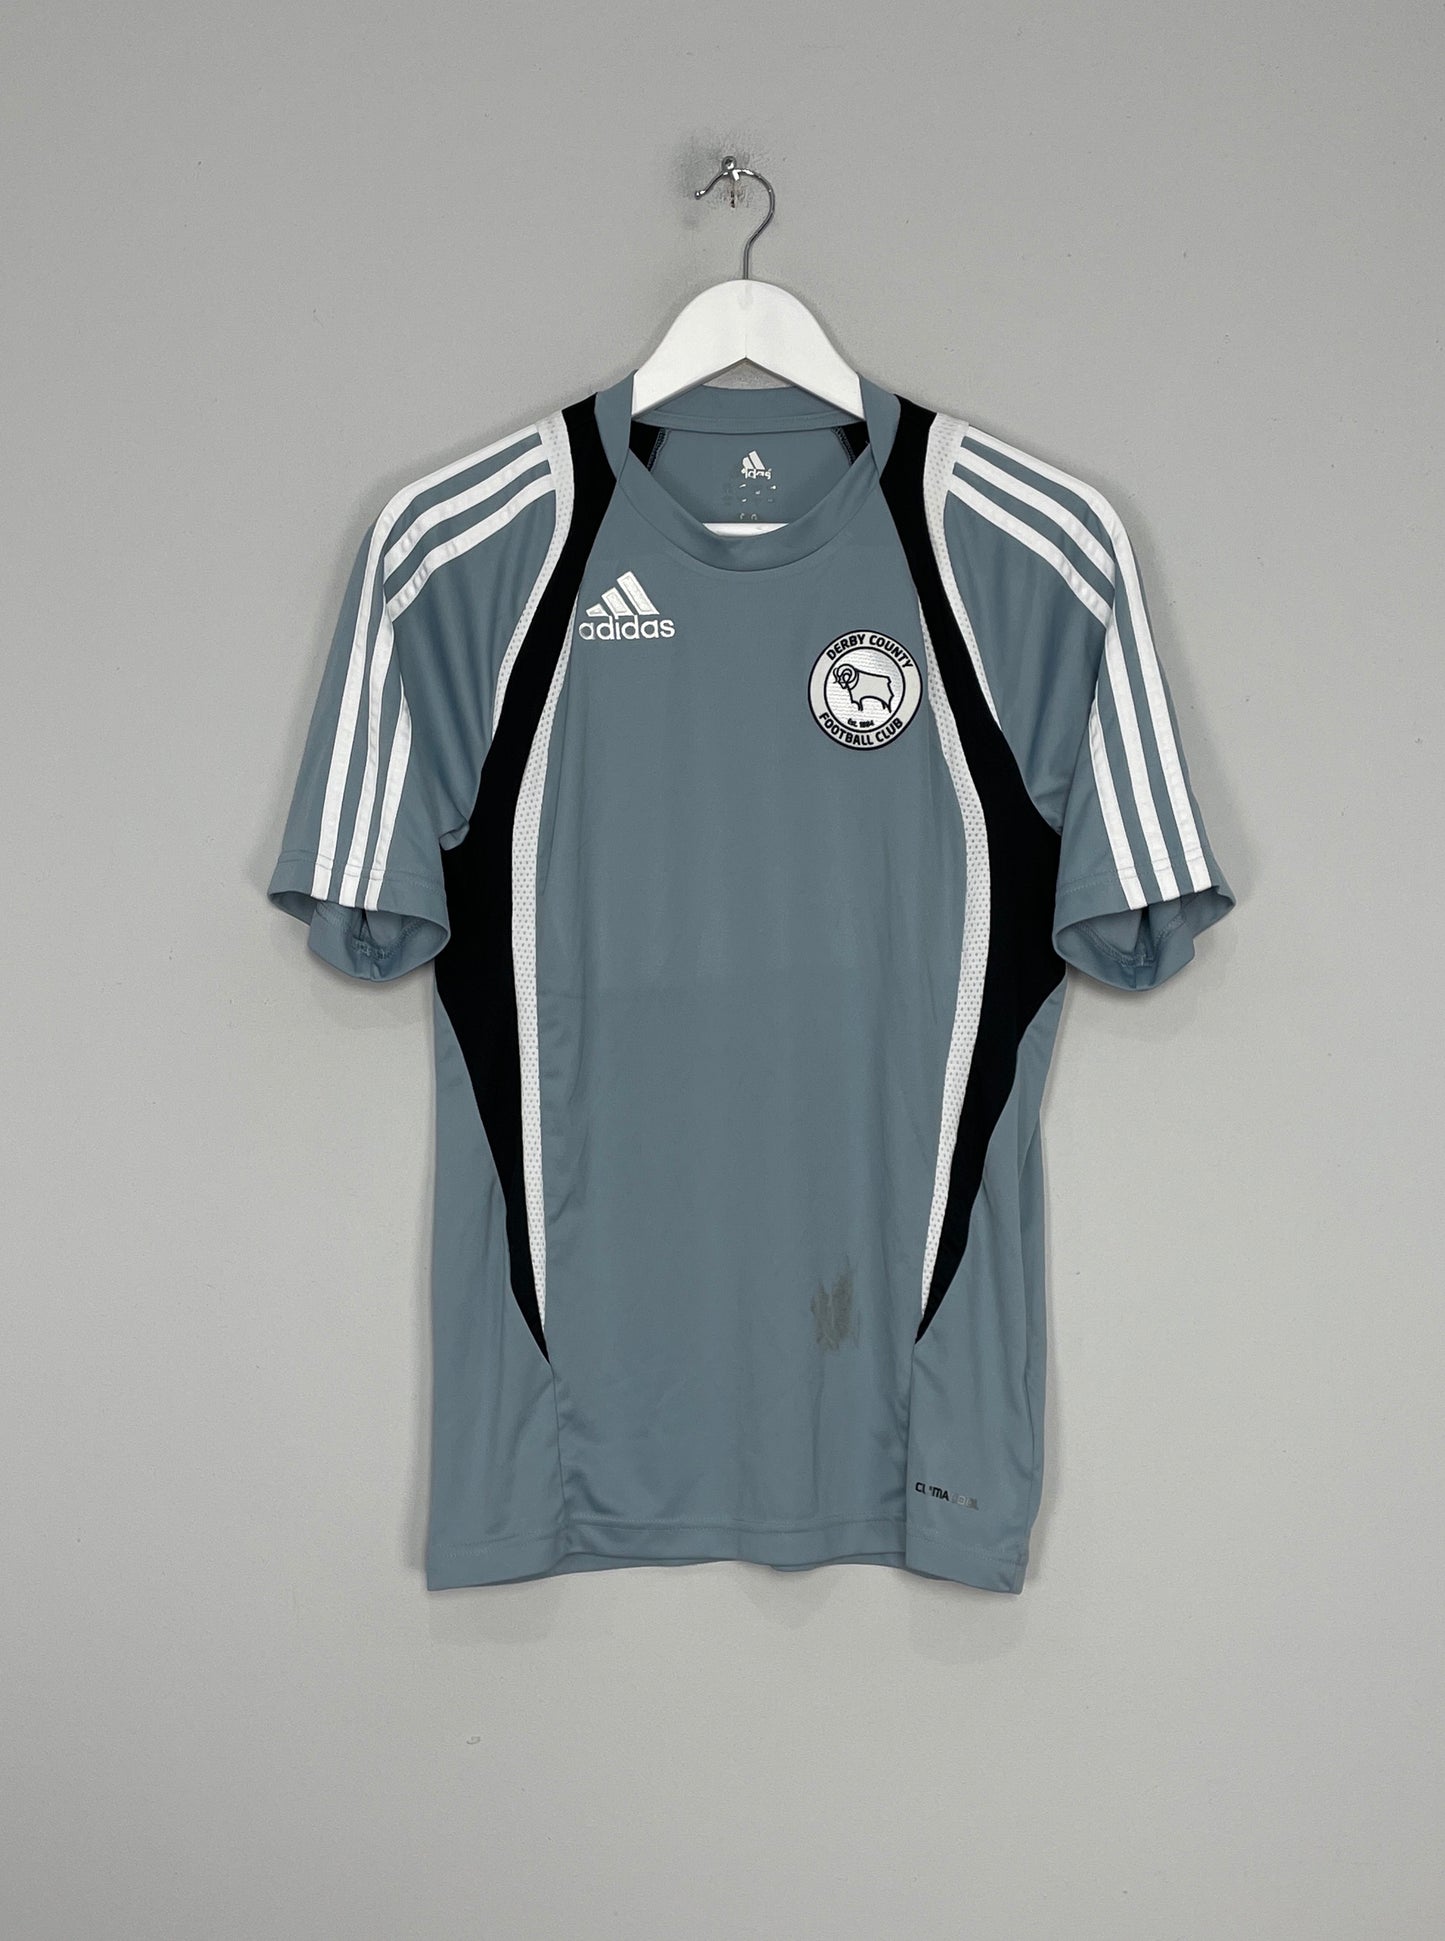 Image of the Derby County shirt from the 2008/09 season